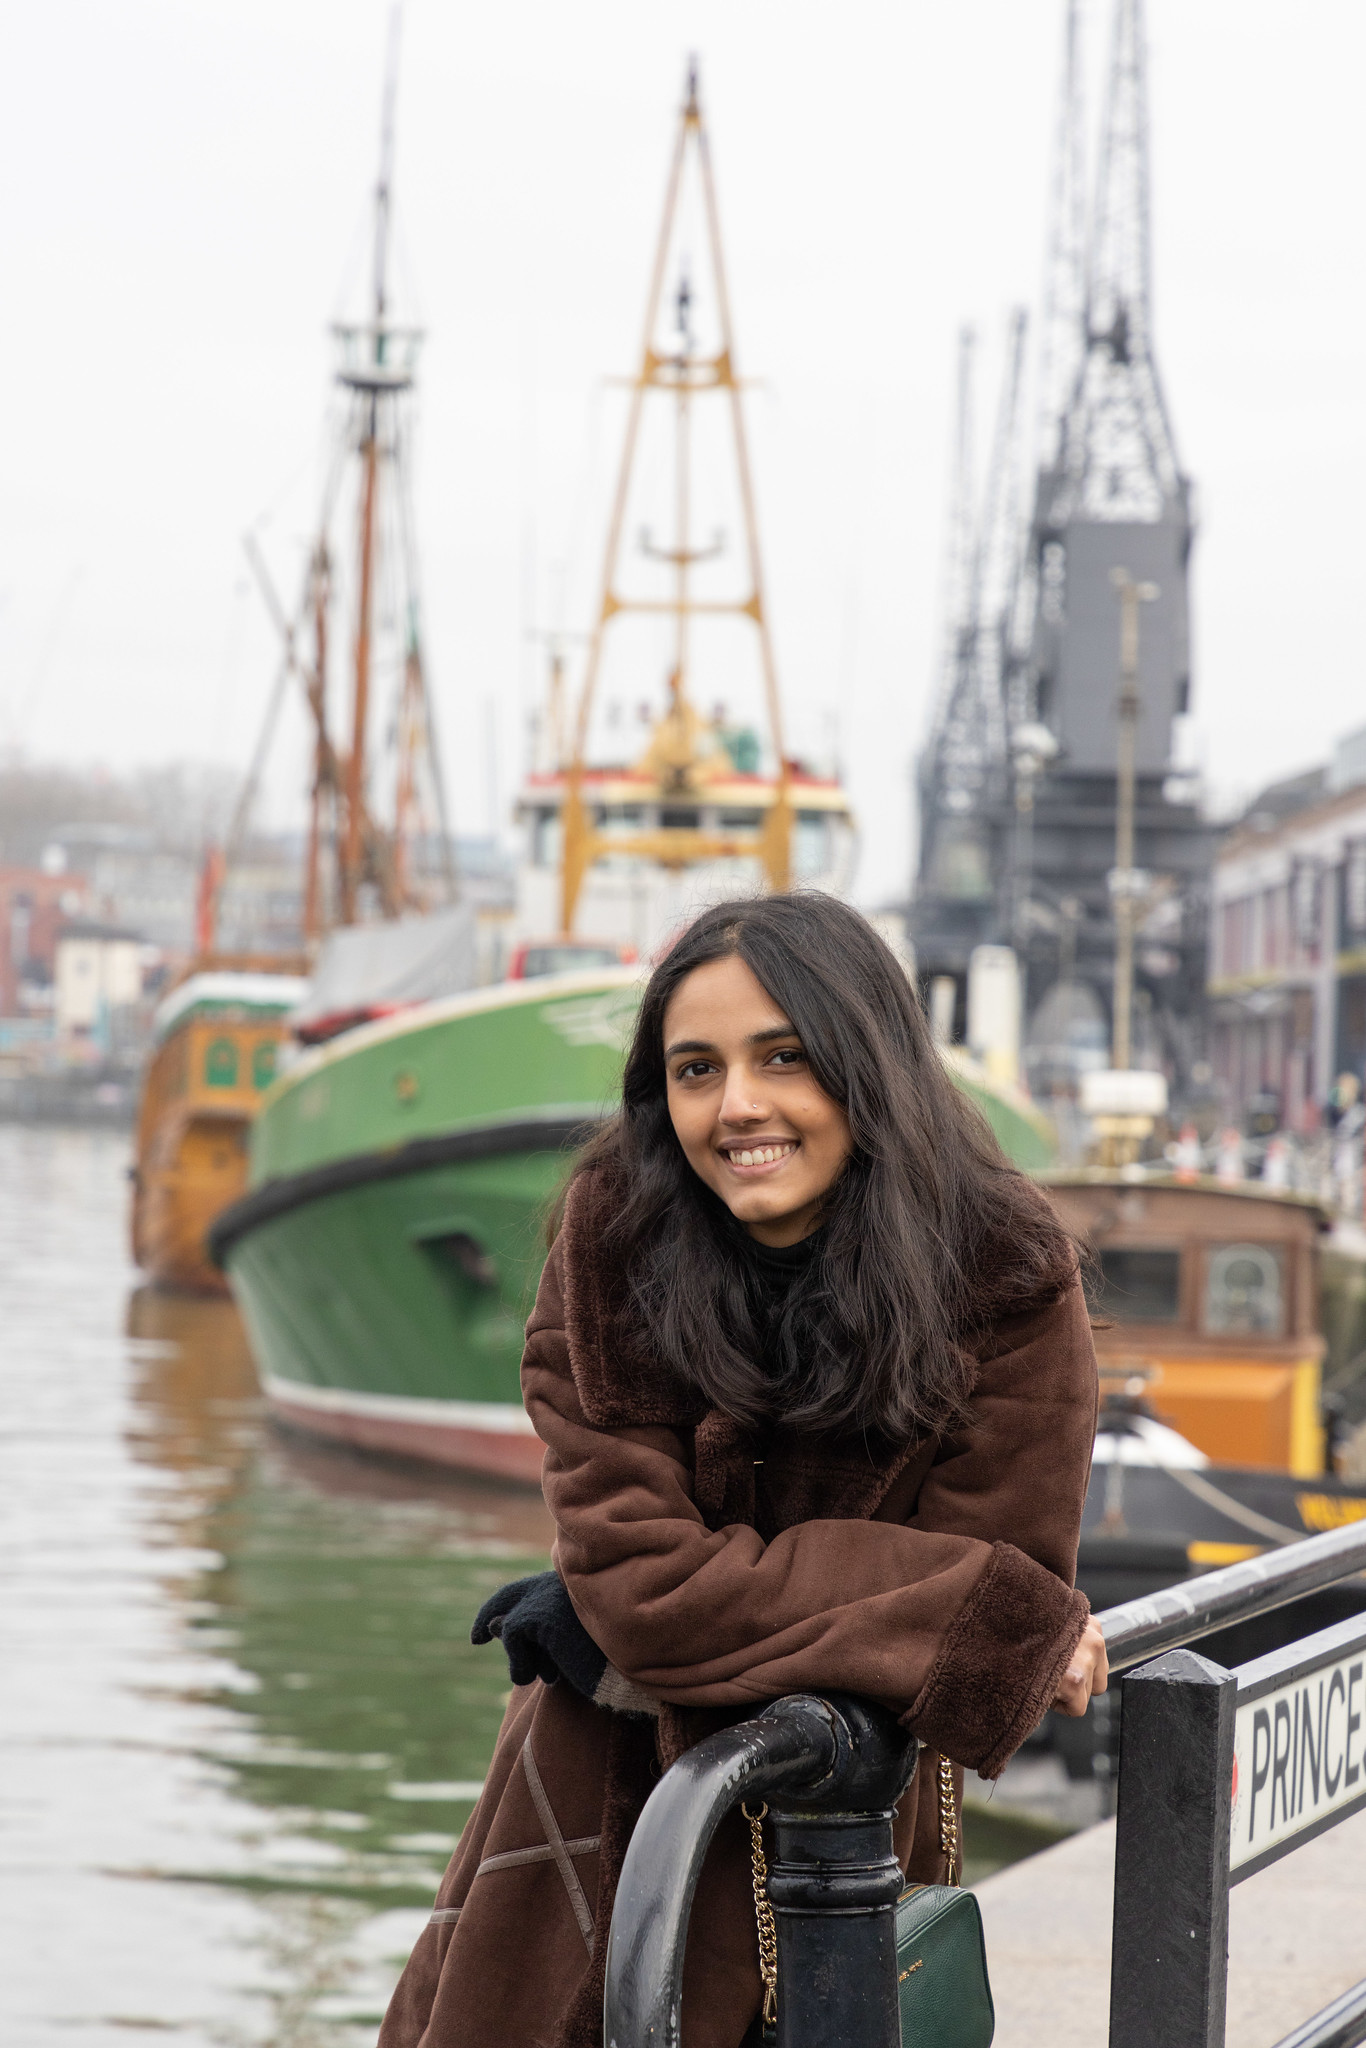 Female student smiling in front of a ship in Bristol Harbourside